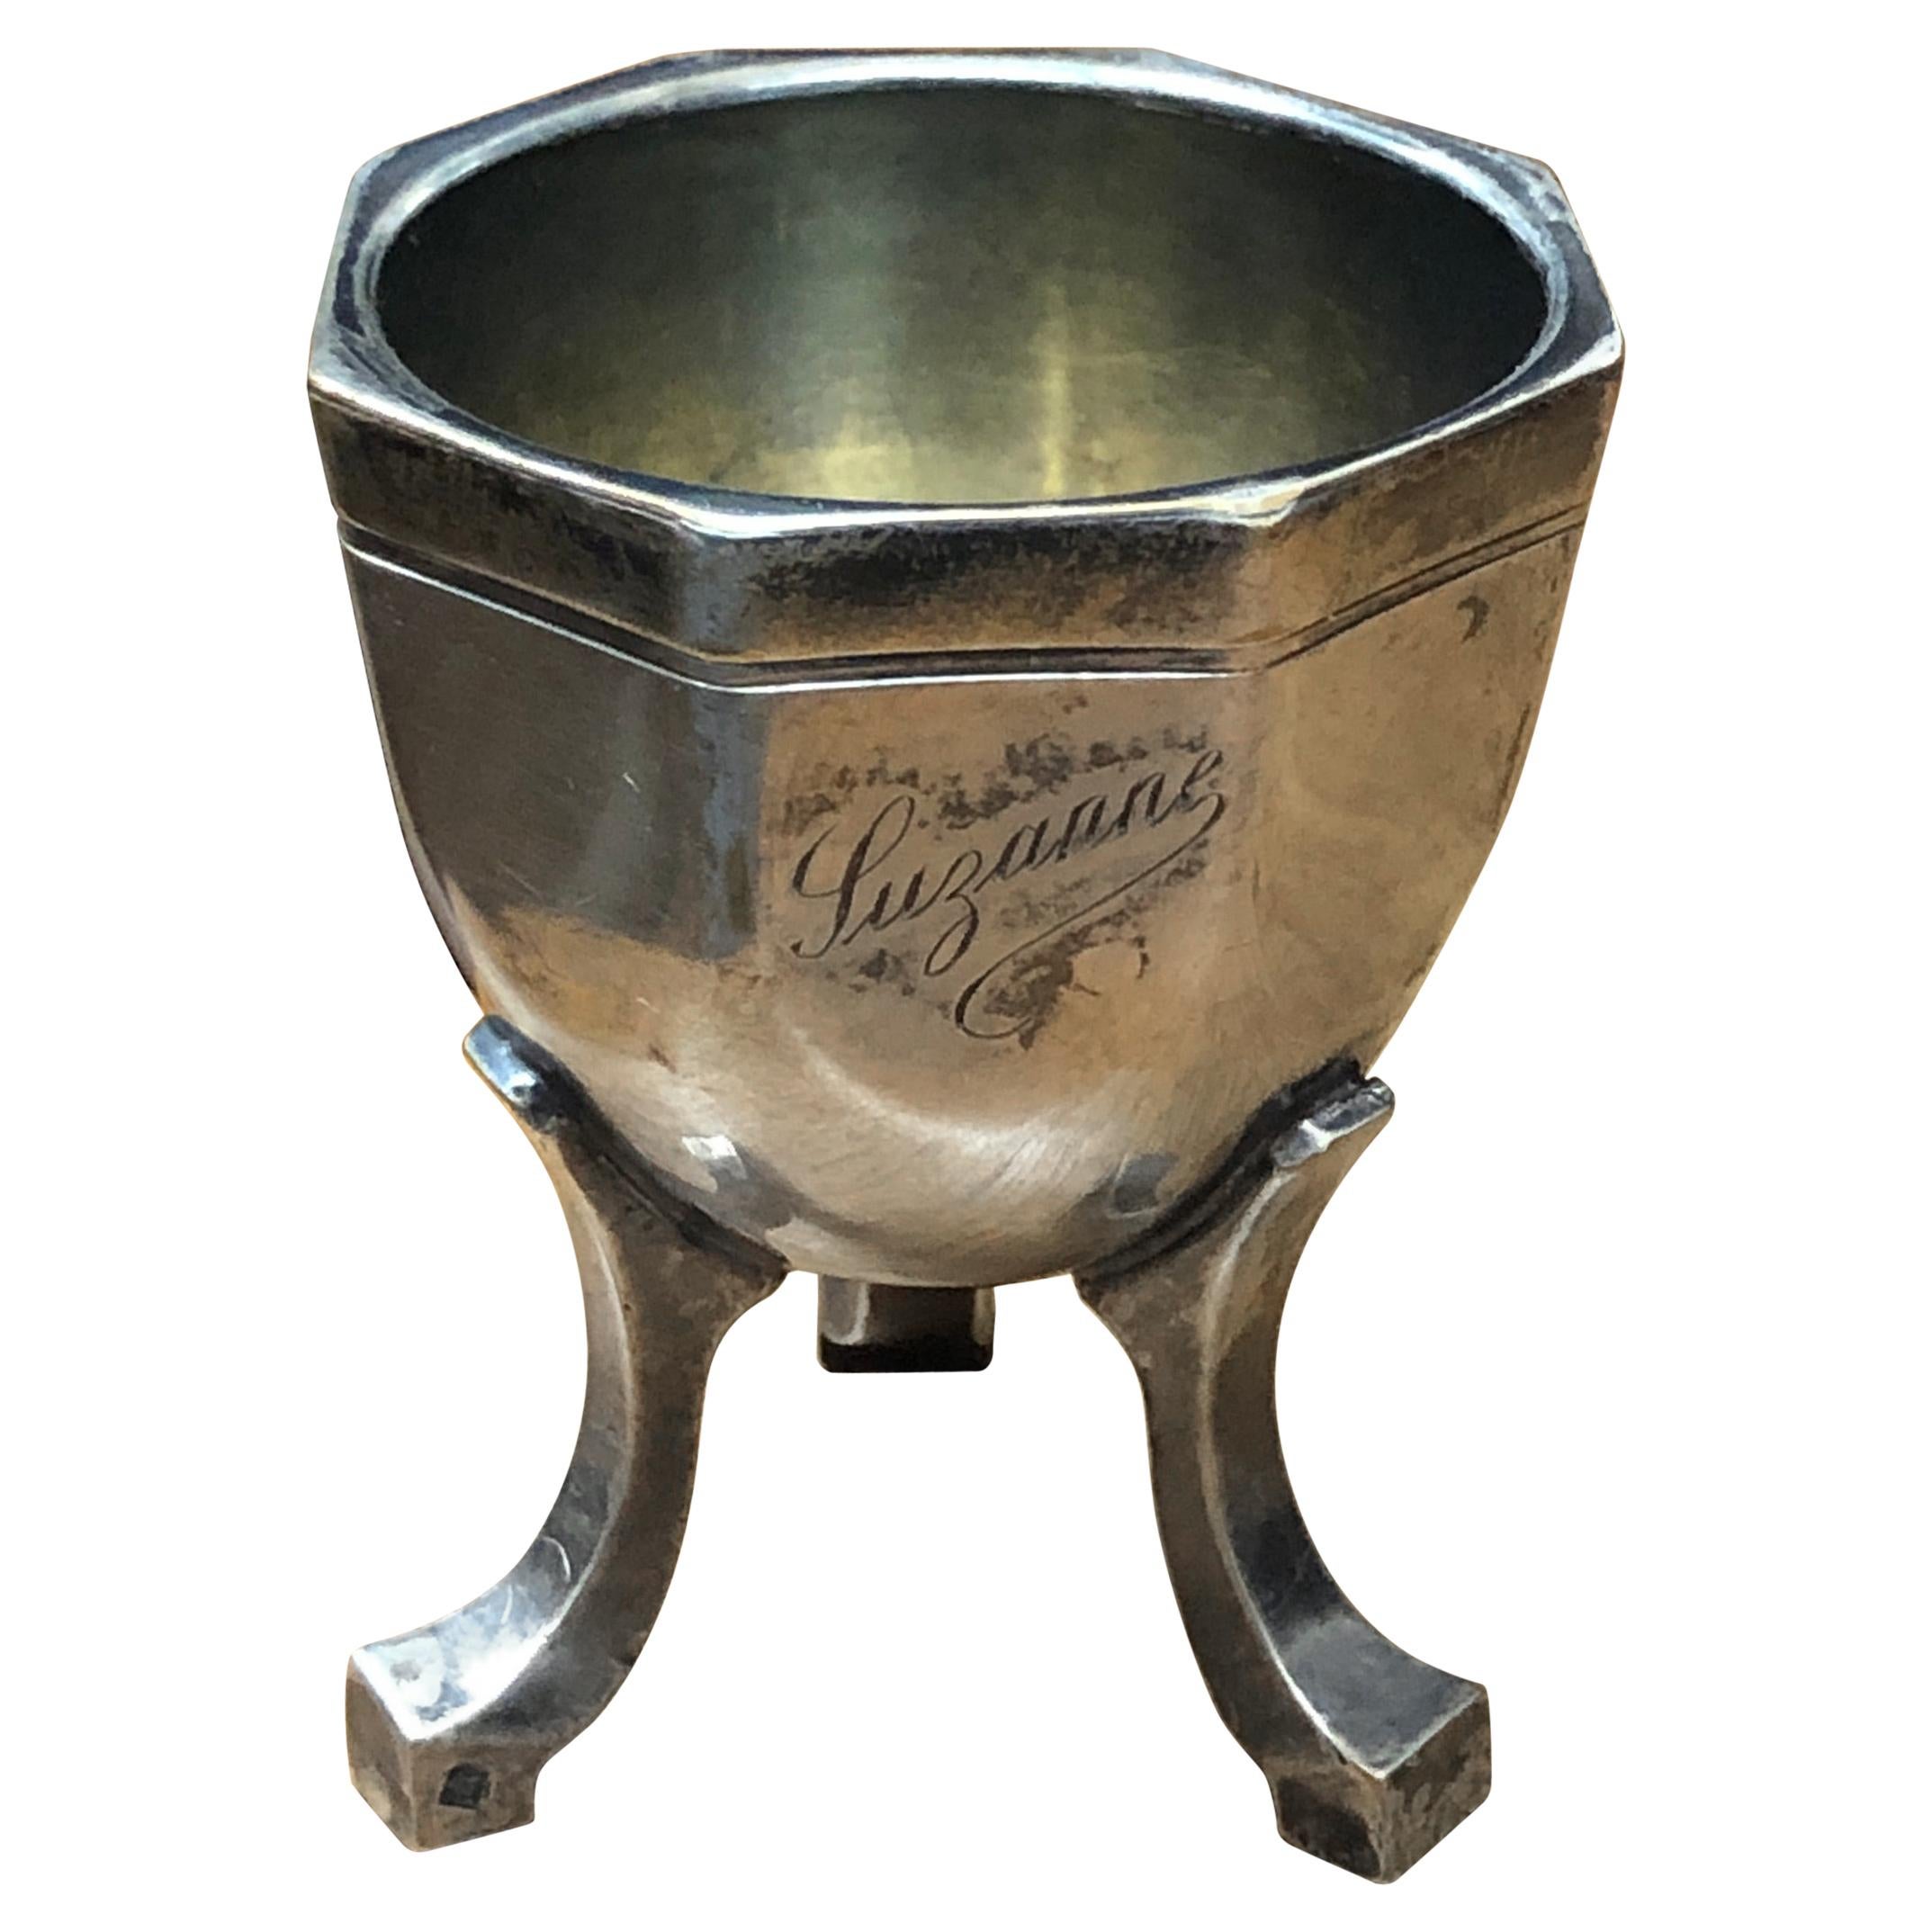 19th Century French Tripod Silver Egg Cup Marked "Suzanne"